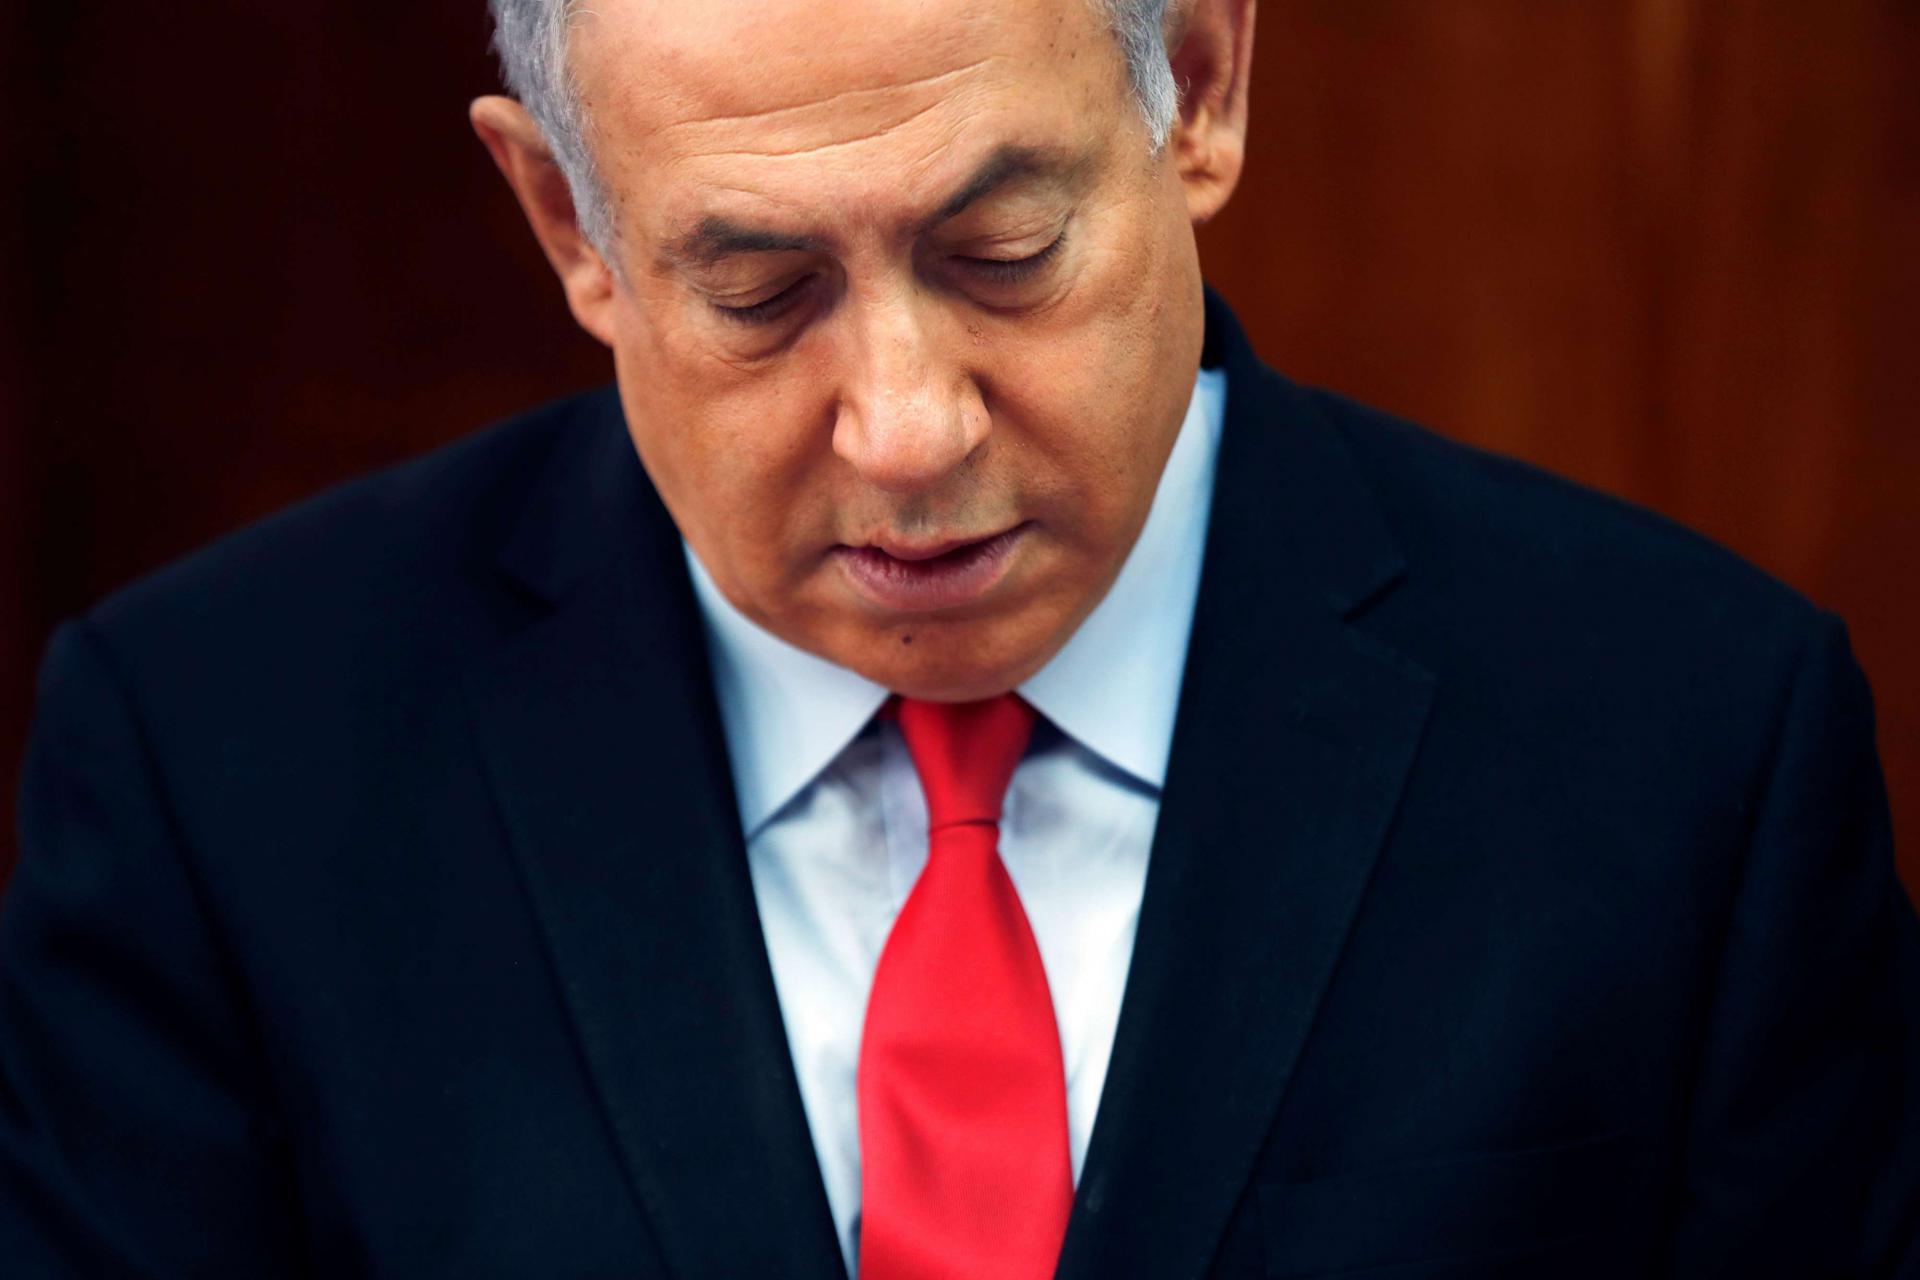 Netanyahu has vehemently denied all the allegations, calling the corruption investigation a "witch-hunt"